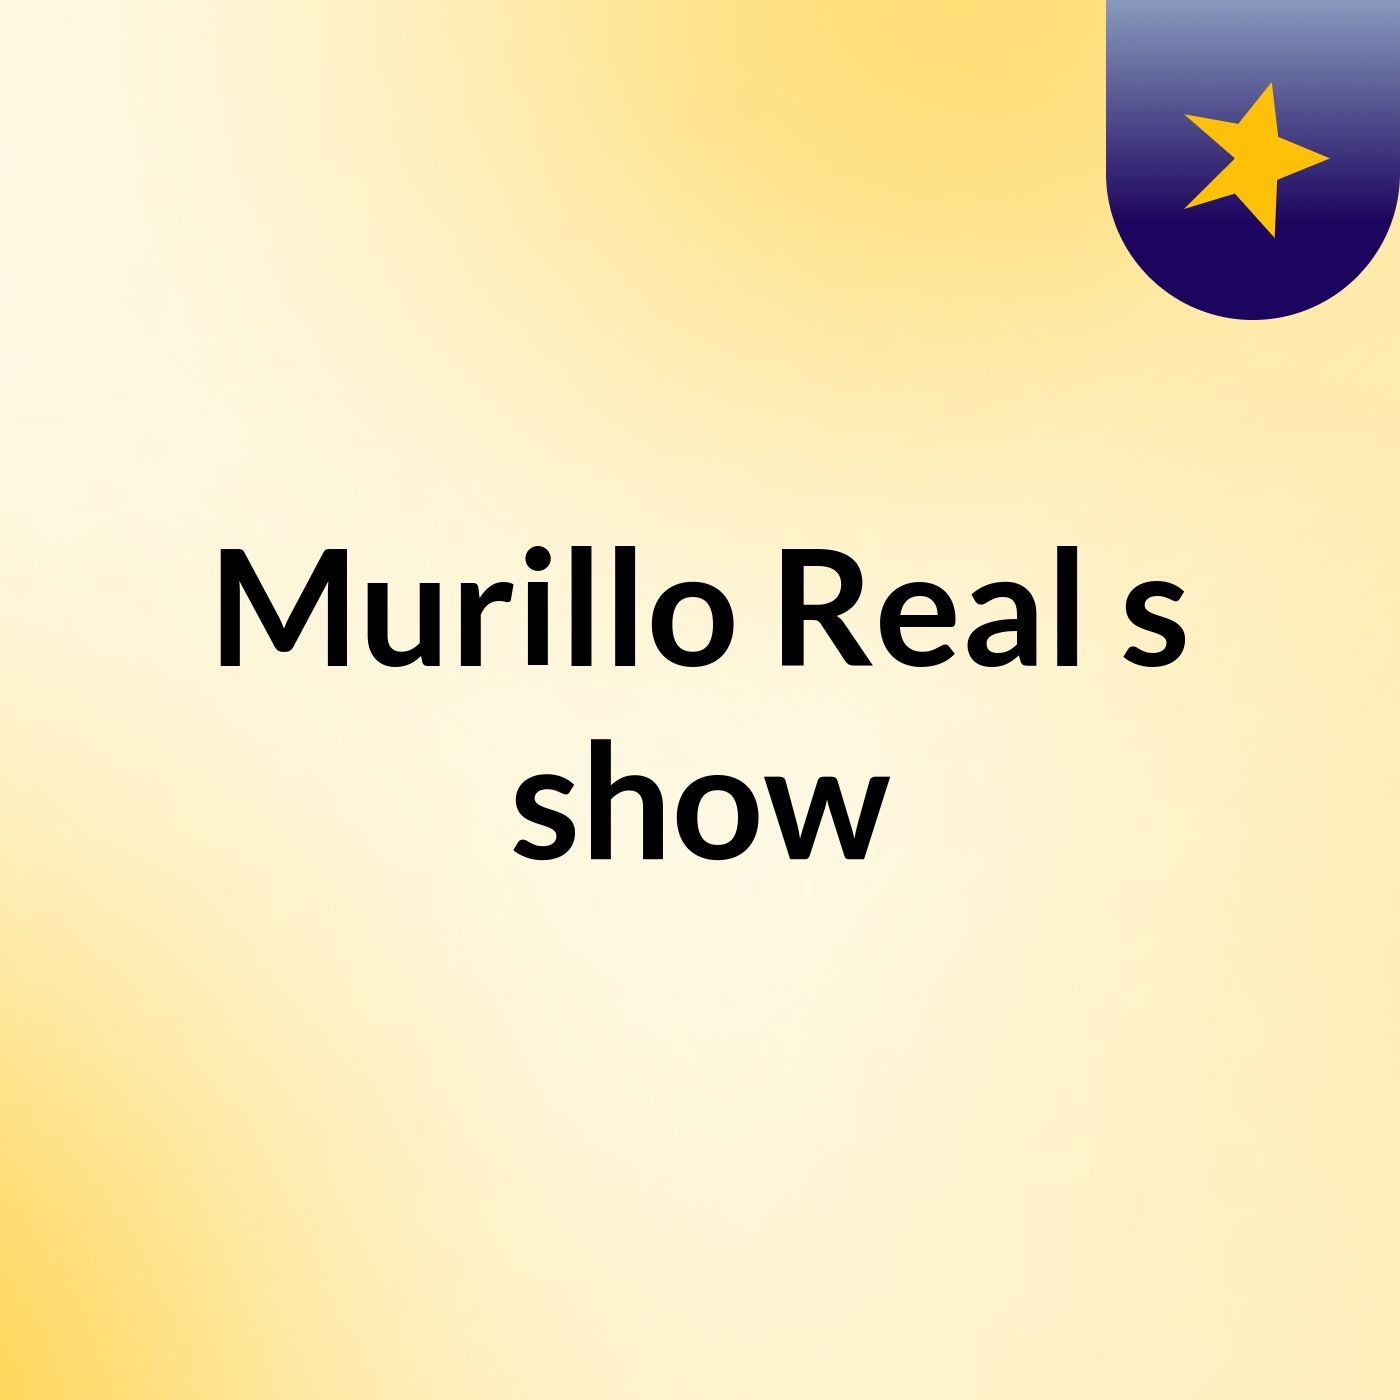 Murillo Real's show